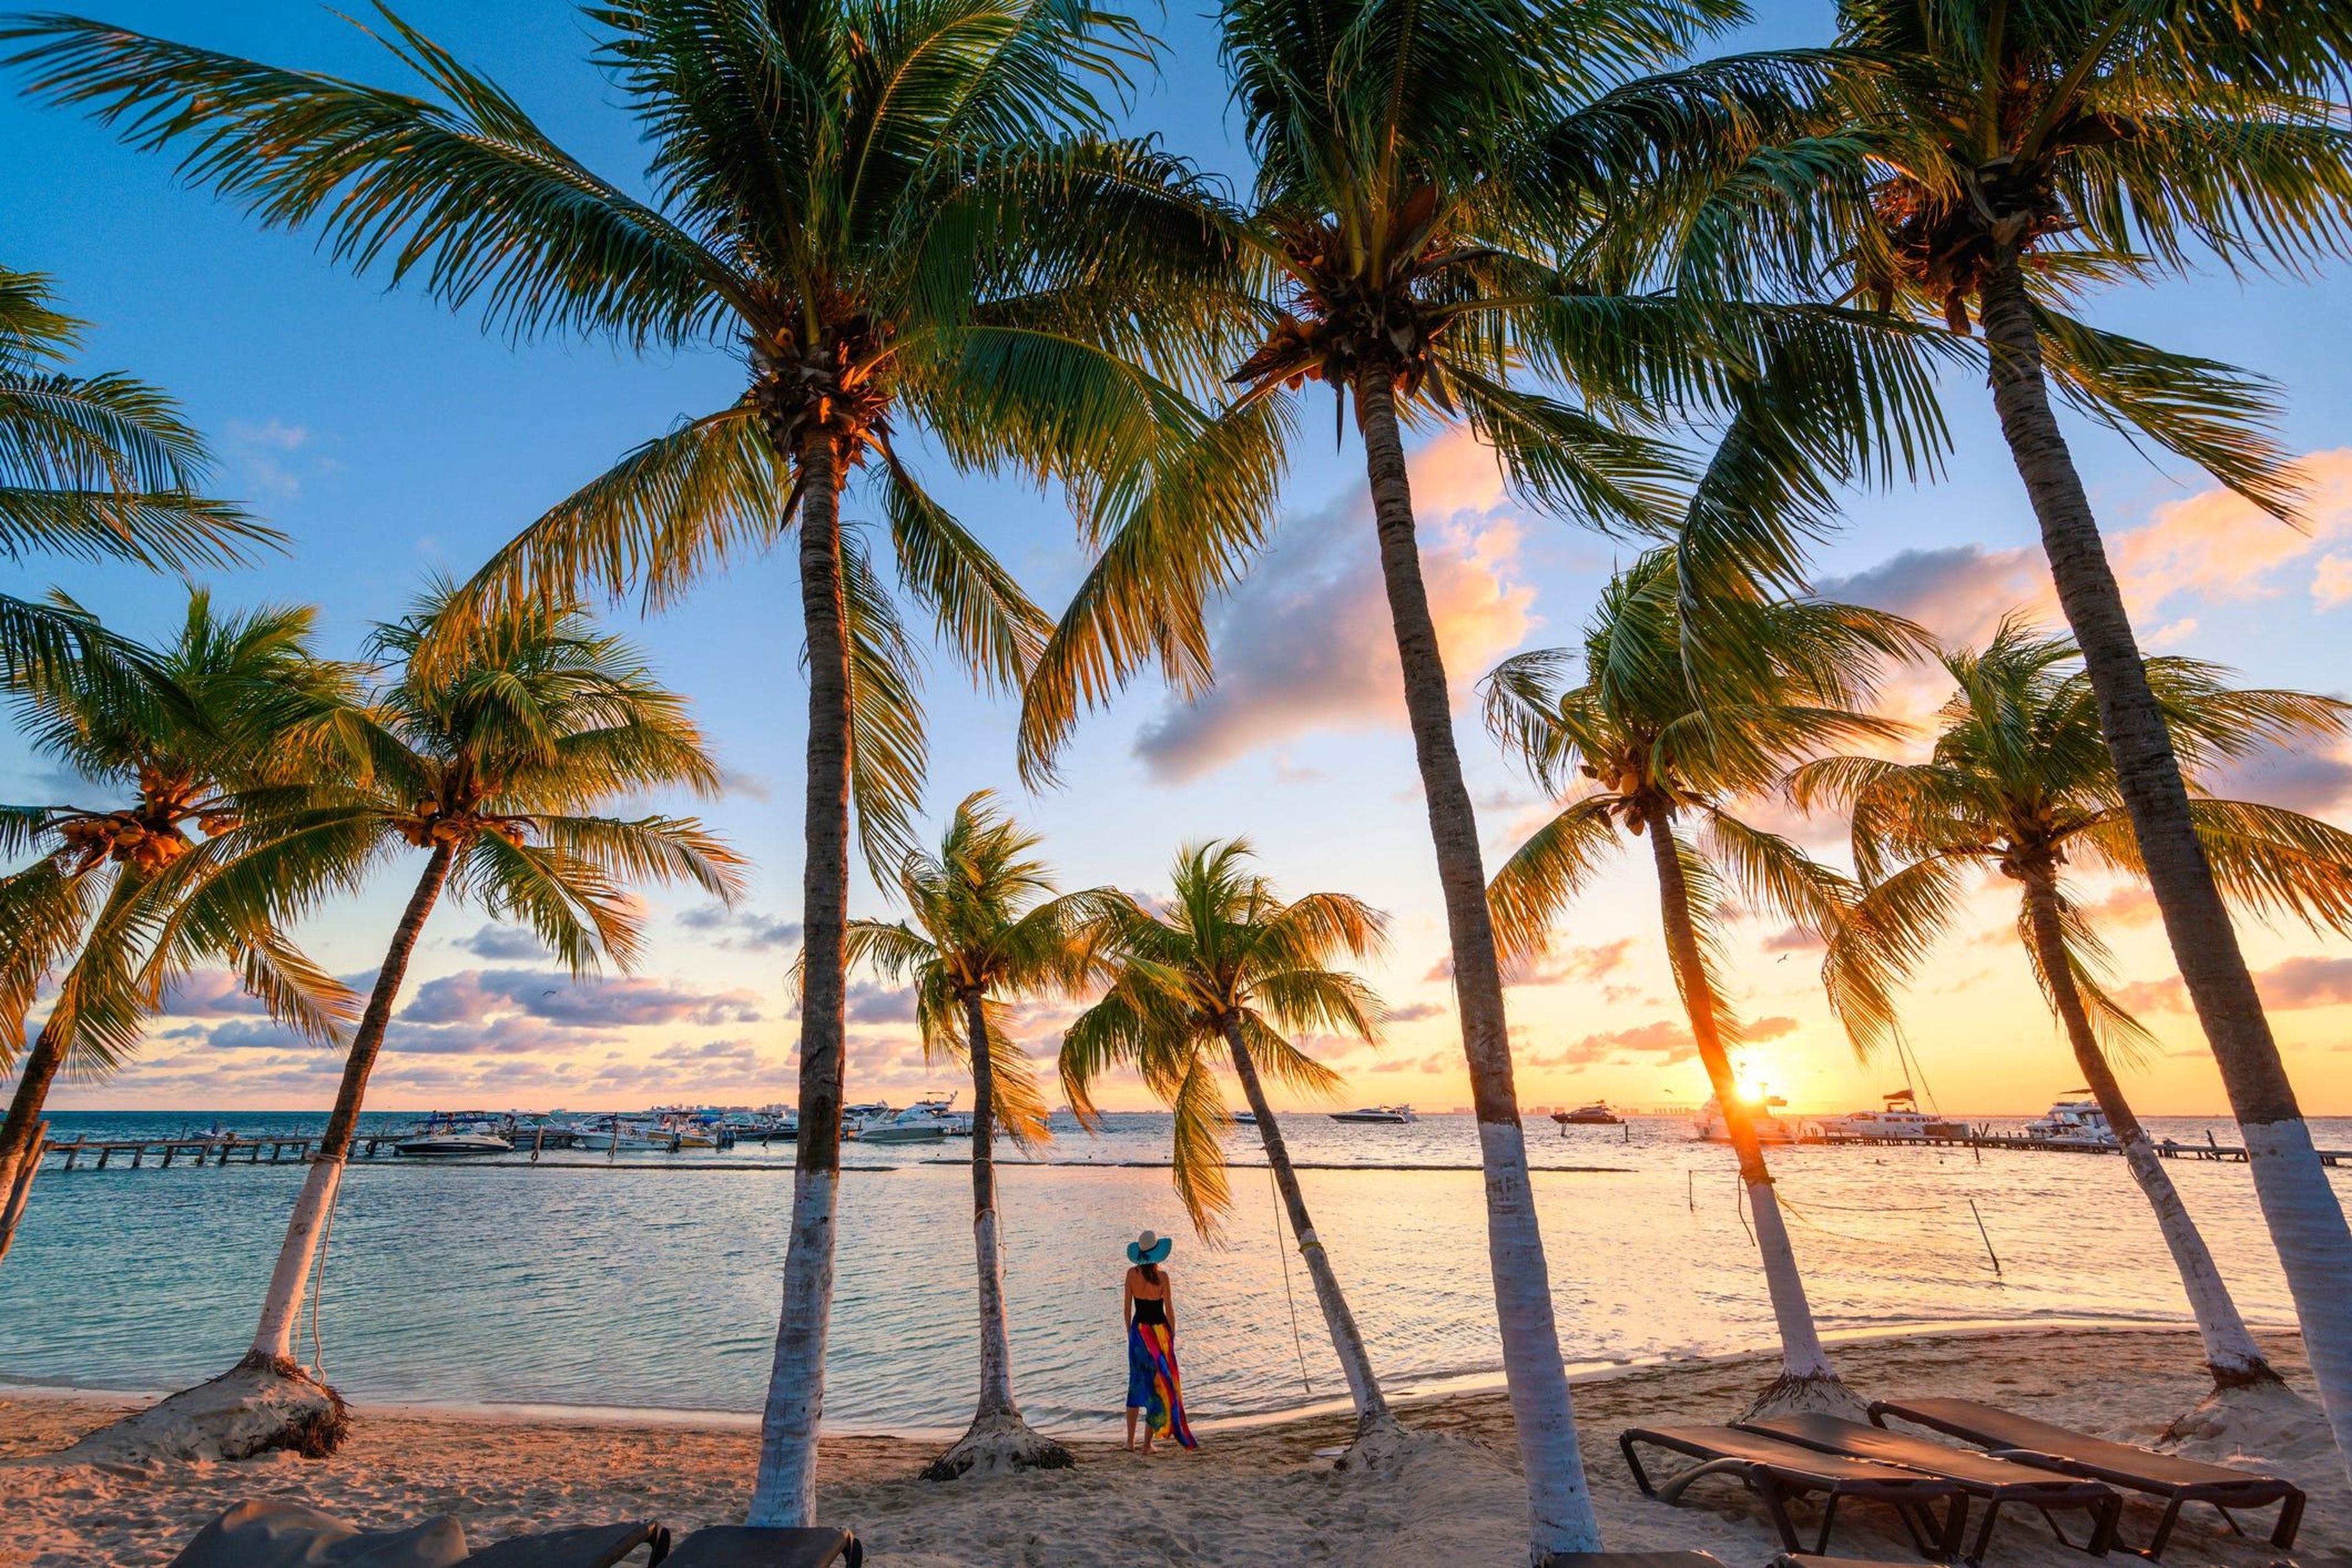 You could be admiring the sunset over the Caribbean before too long.